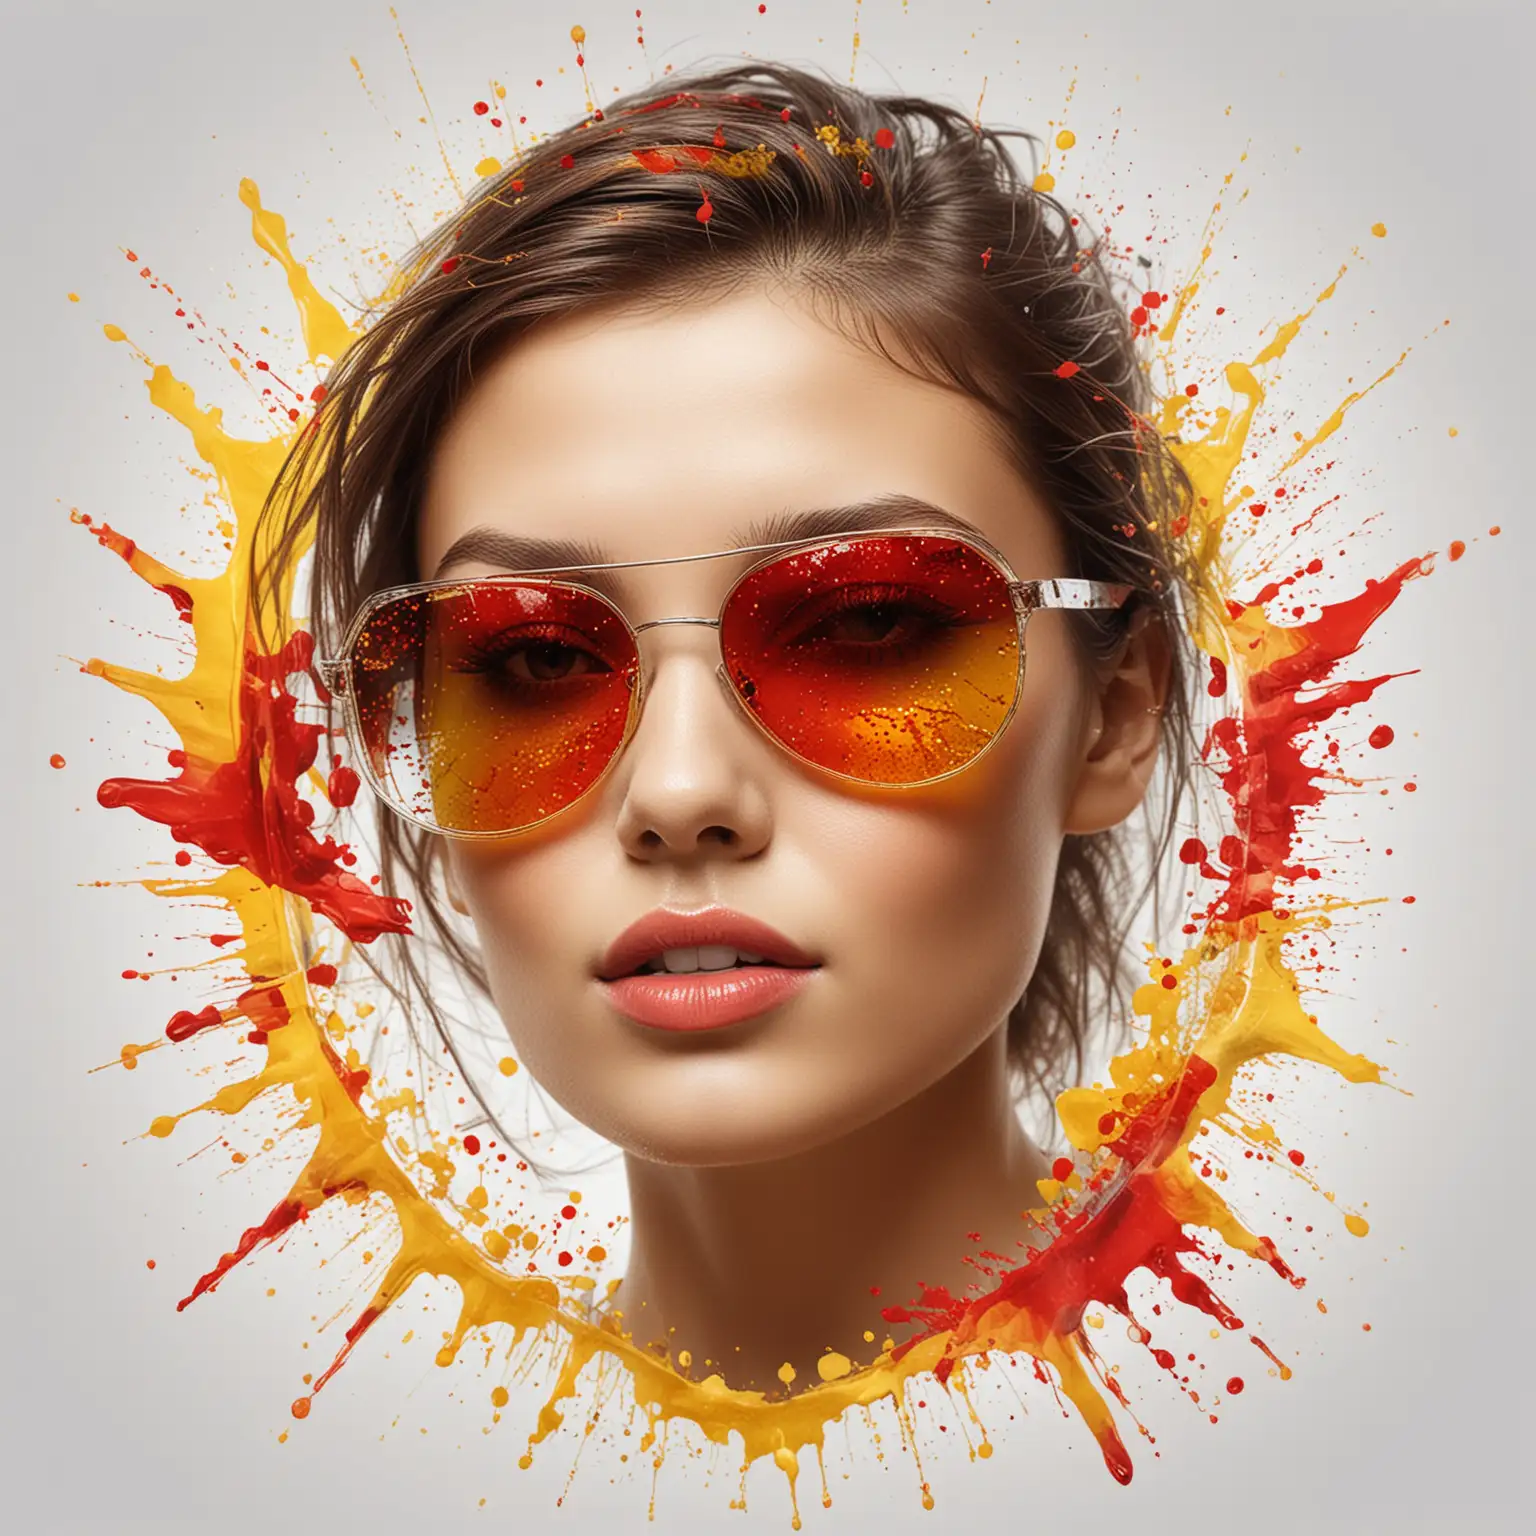 Stylish Woman in Sunglasses Artistic Design with Red and Yellow Ink Splashes